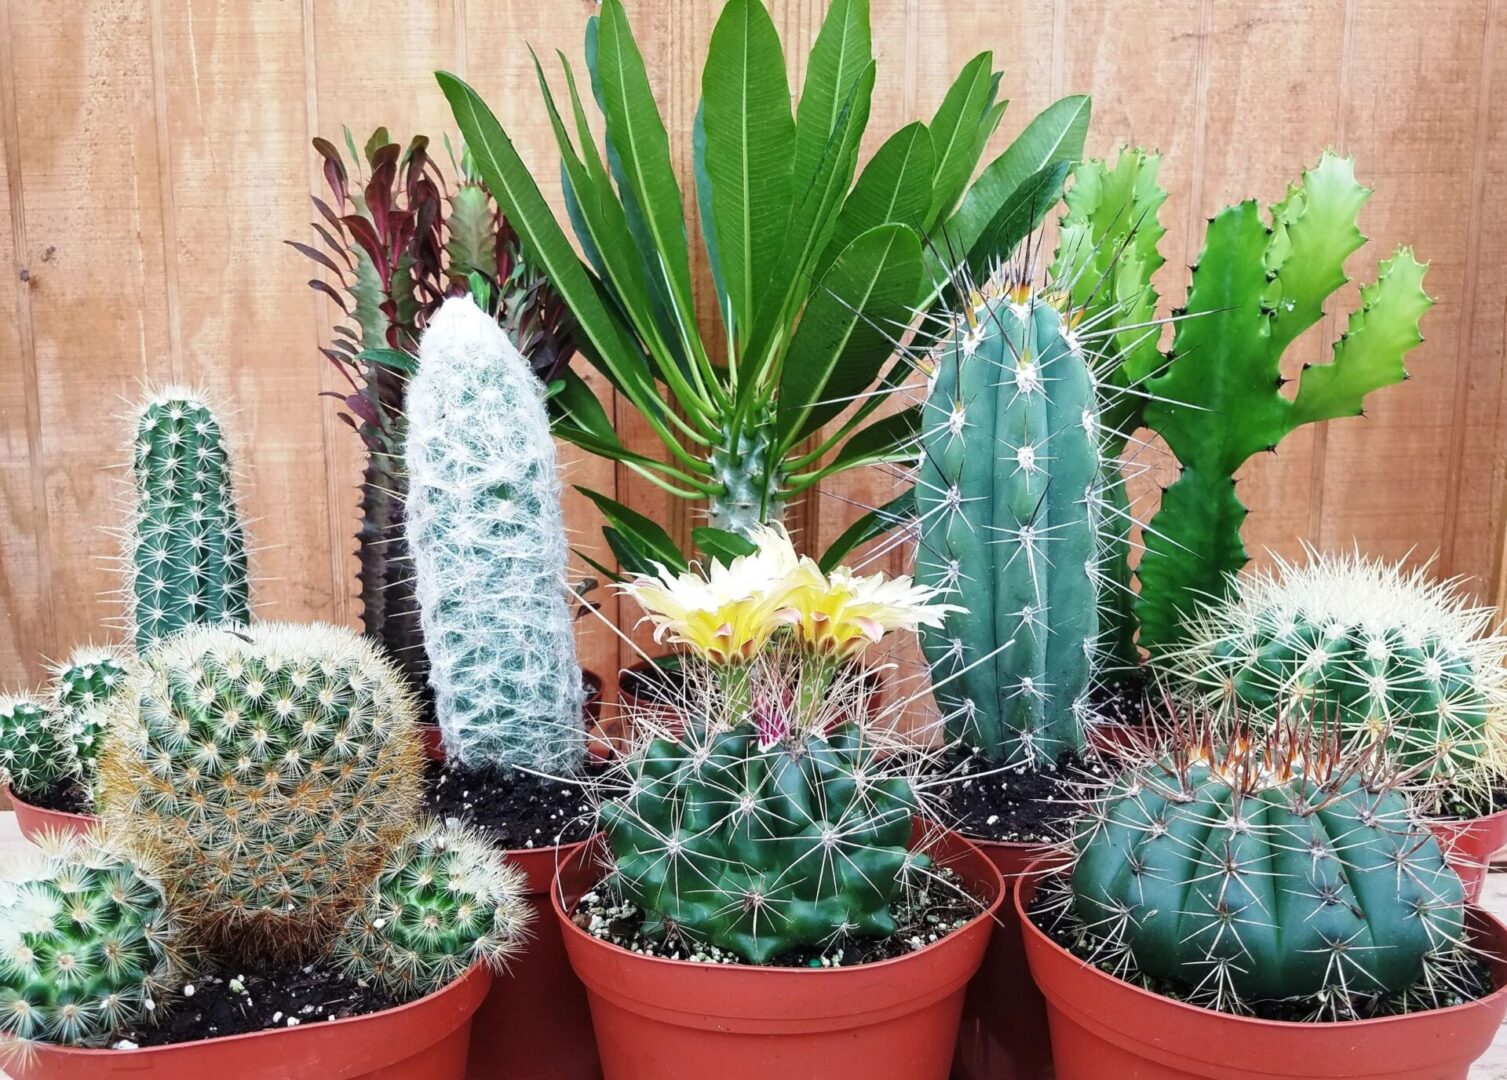 A collection of cactus plant in different size